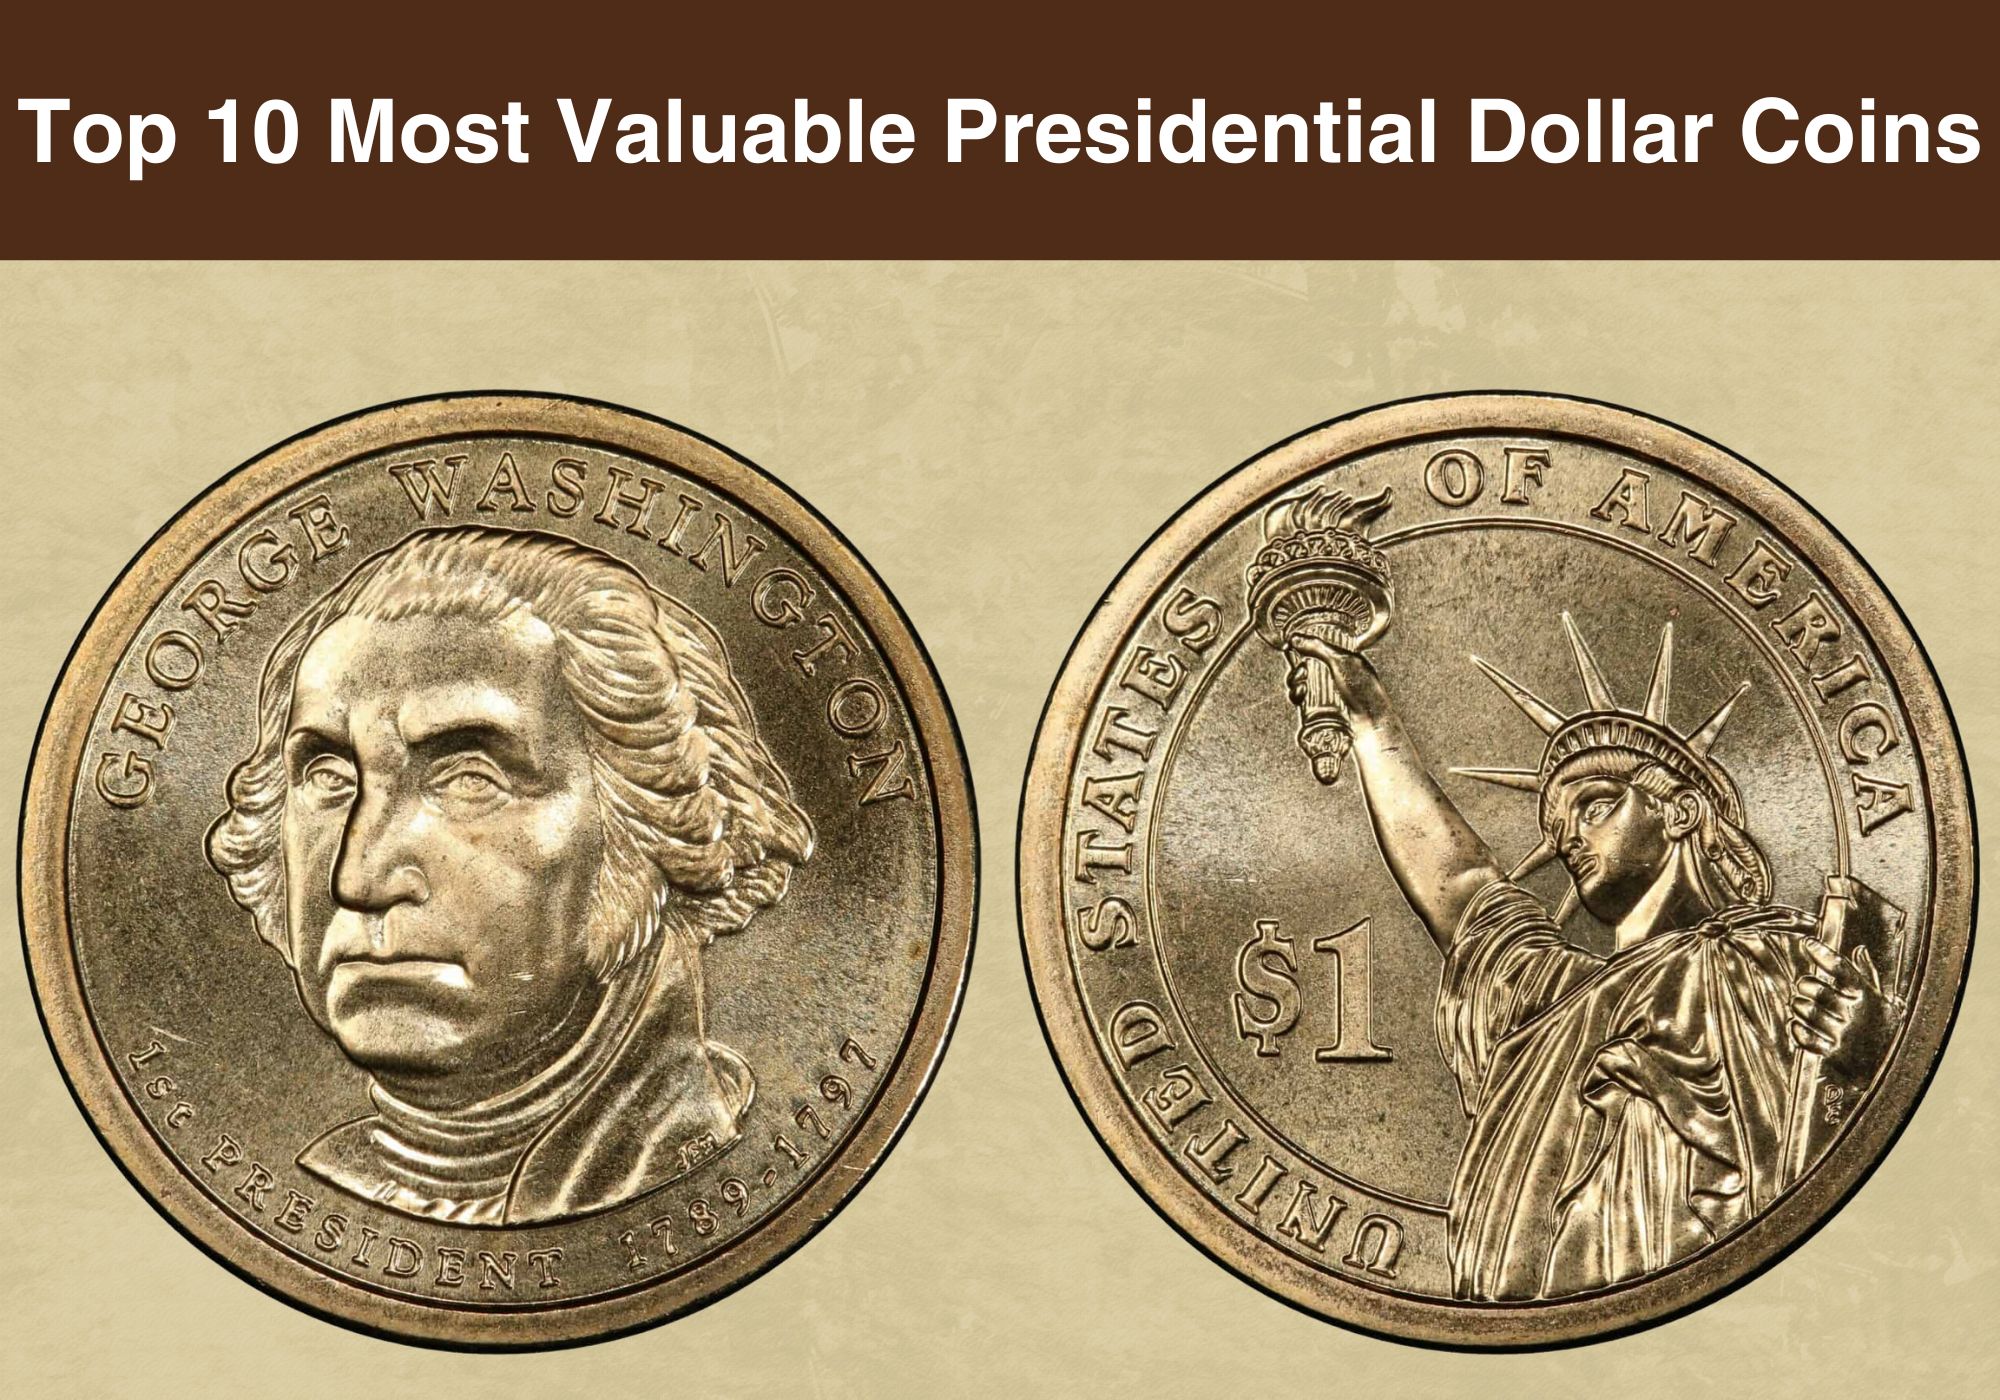 WHICH GOLD COINS ARE THE MOST VALUABLE?